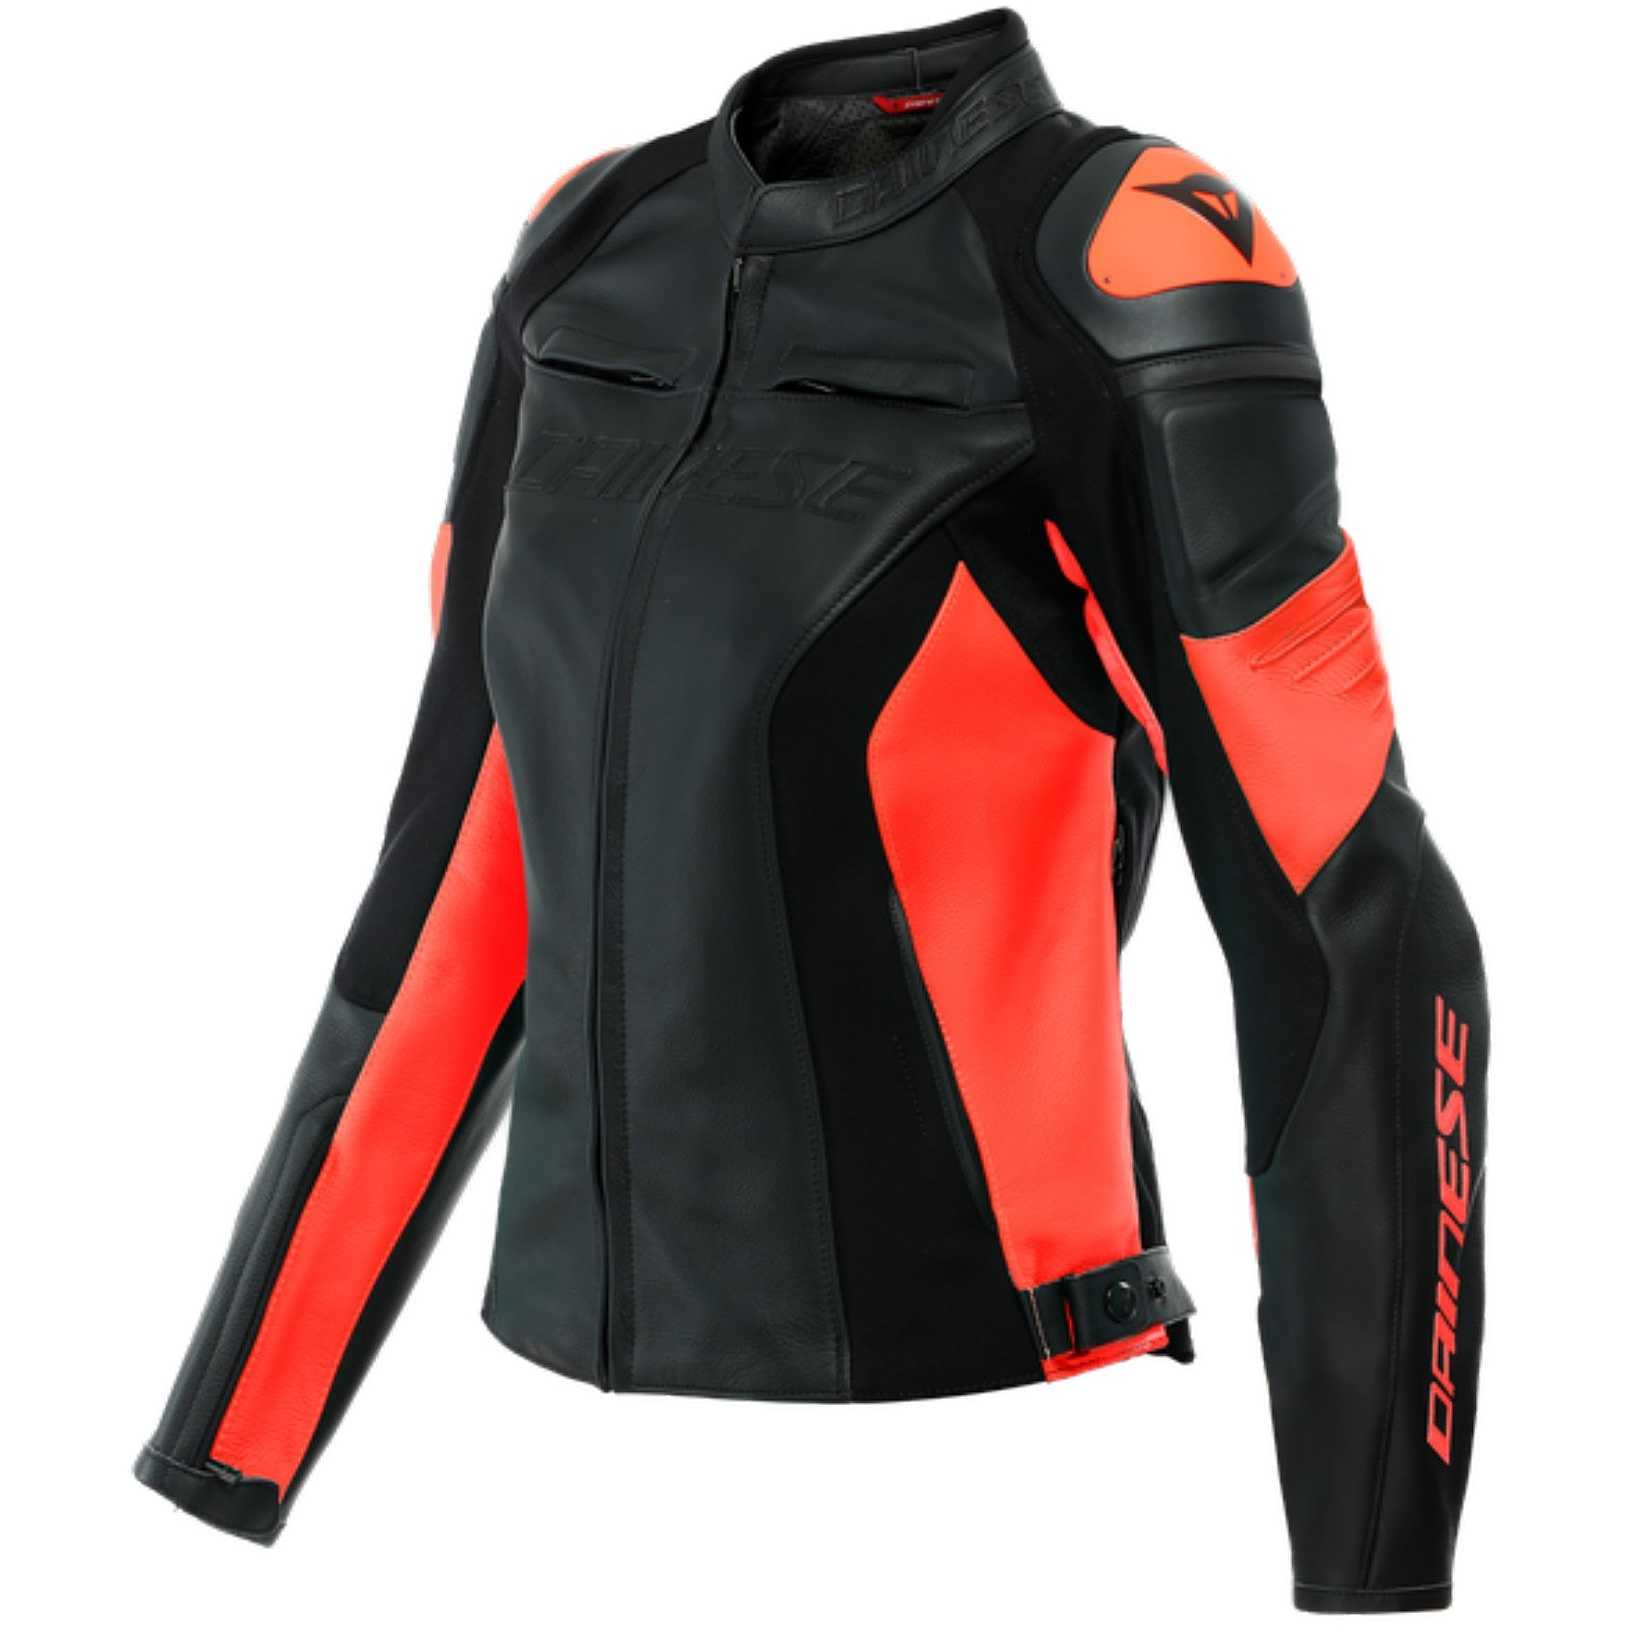 https://data.outletmoto.eu/imgprodotto/giacca-moto-donna-in-pelle-dainese-racing-4-lady-nero-rosso-fluo_146202_zoom.jpg